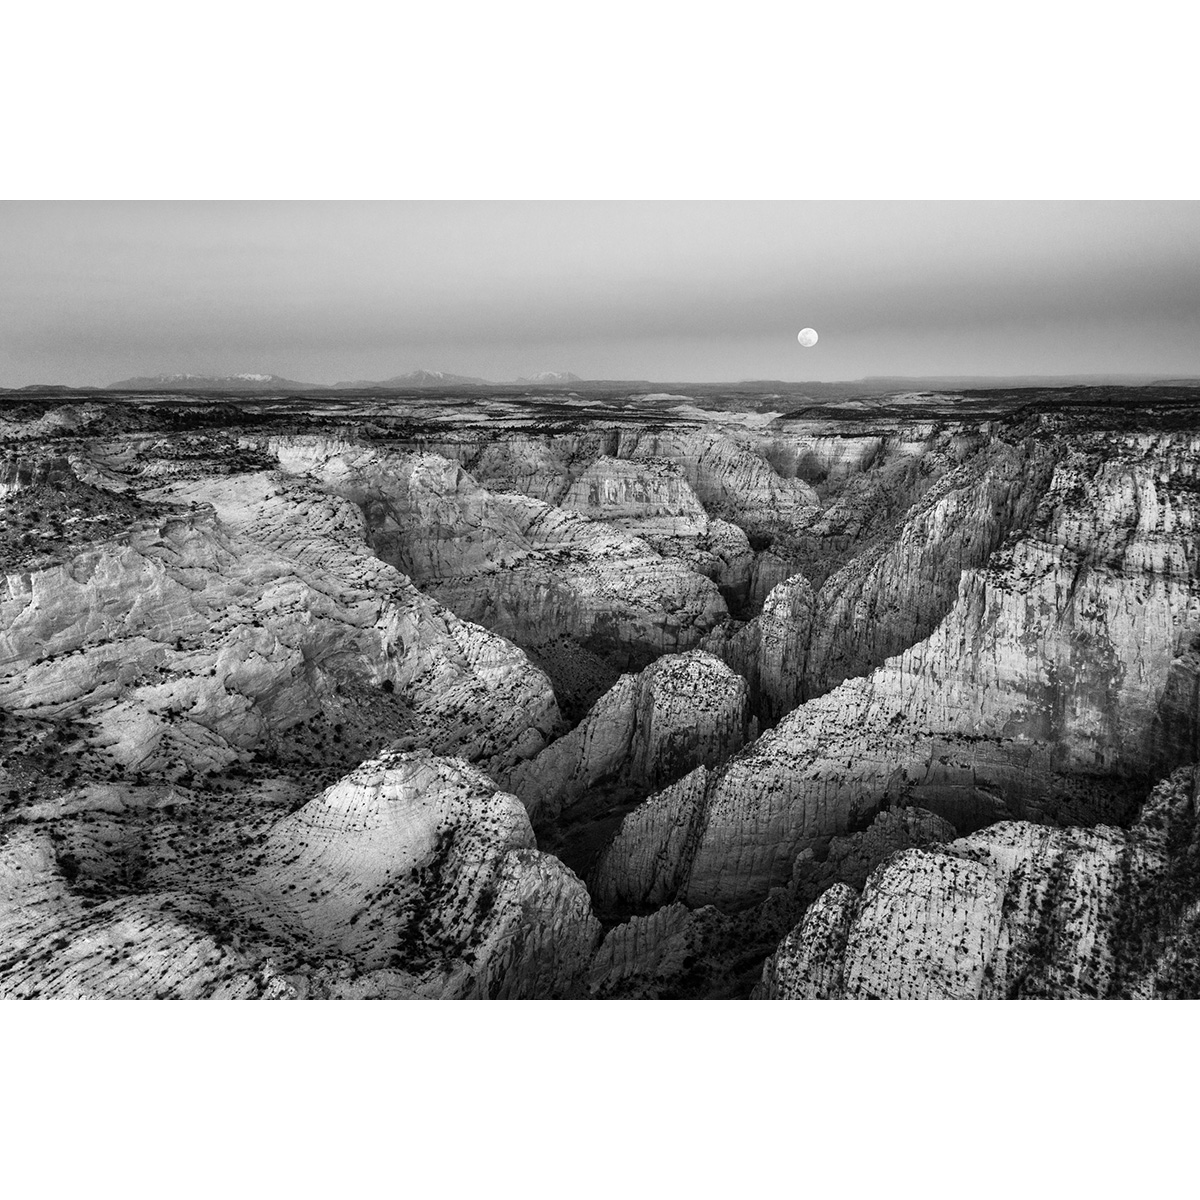 A black and white fine-art photograph of a full moon rising over the Escalante drainage.